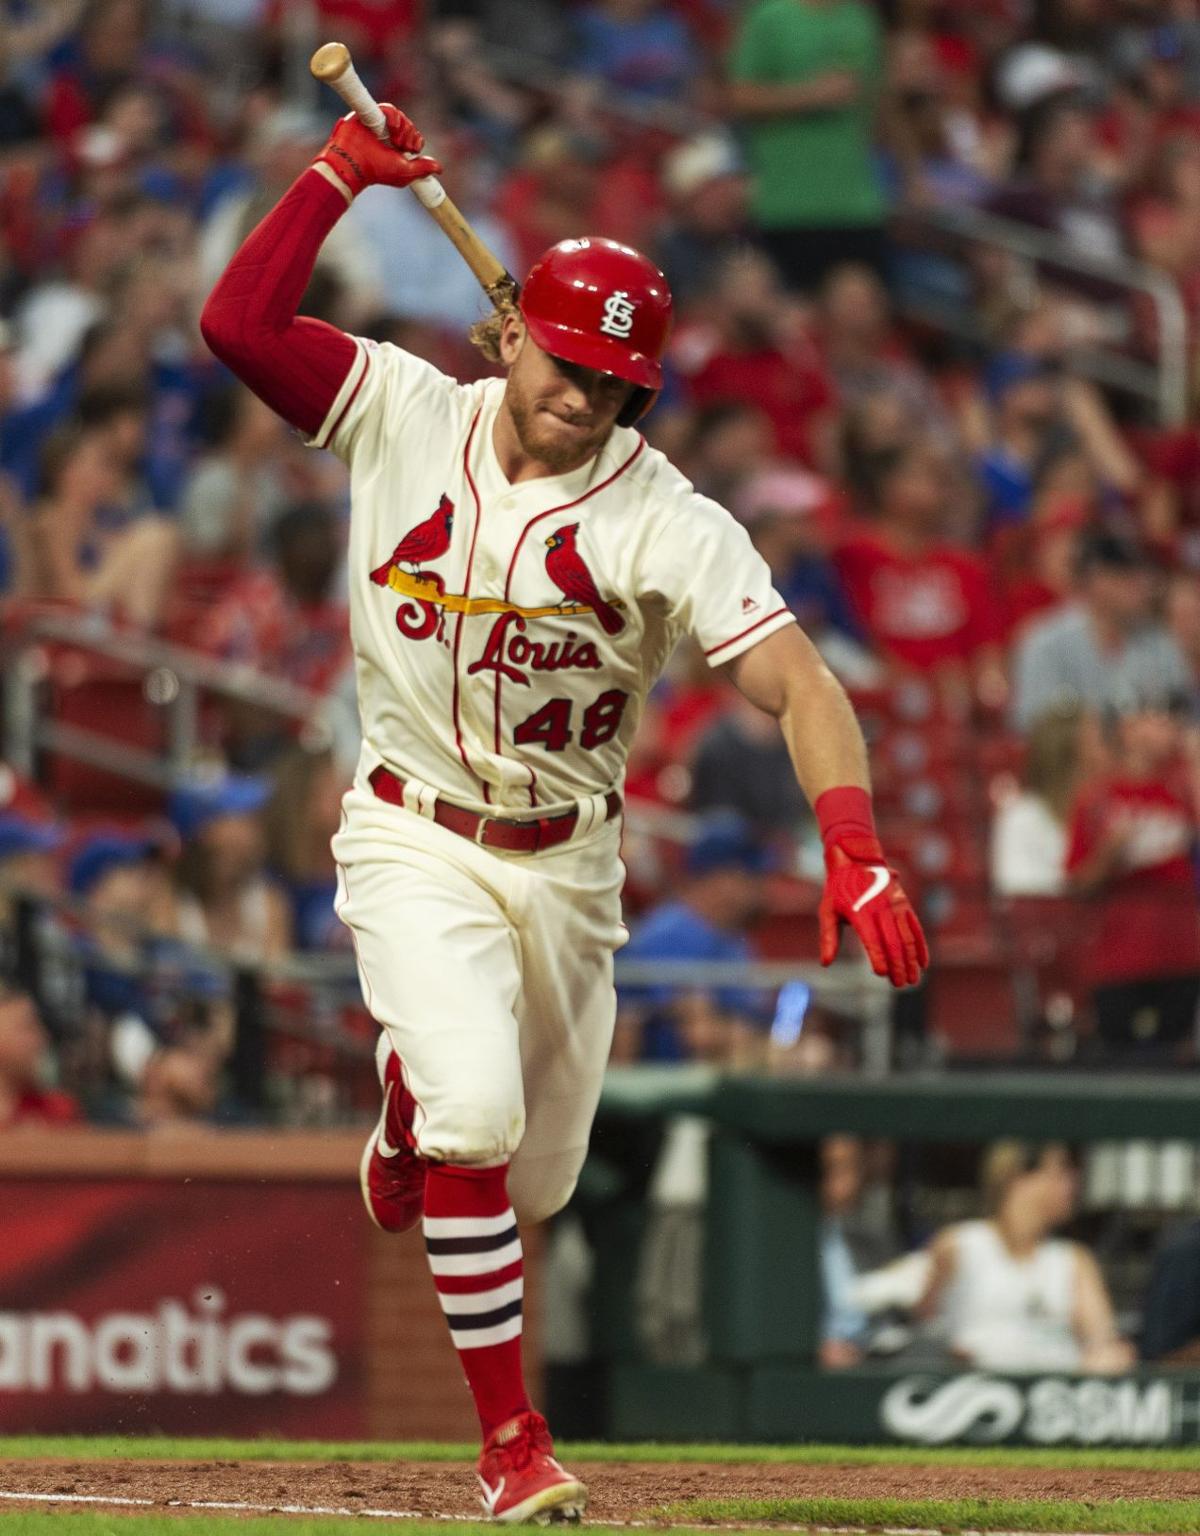 Cards, Cubs have long delay at Busch | St. Louis Cardinals | 0